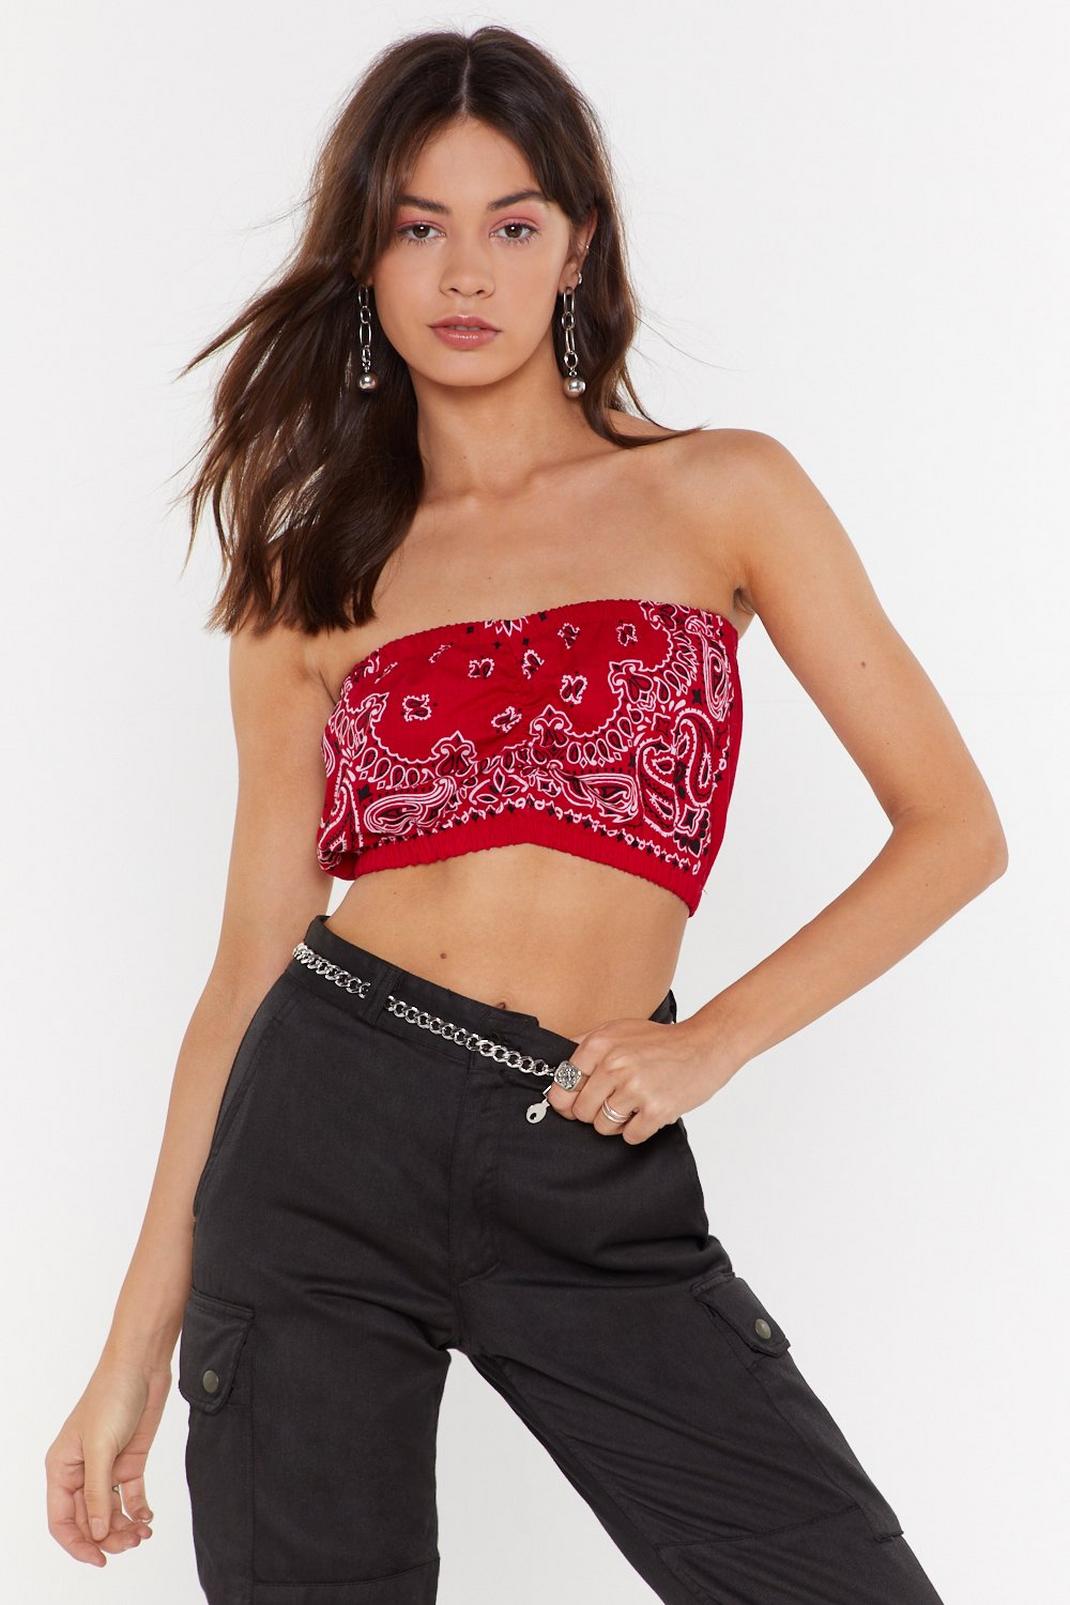 Nasty Gal Vintage Playing in the Bandana Crop Top image number 1